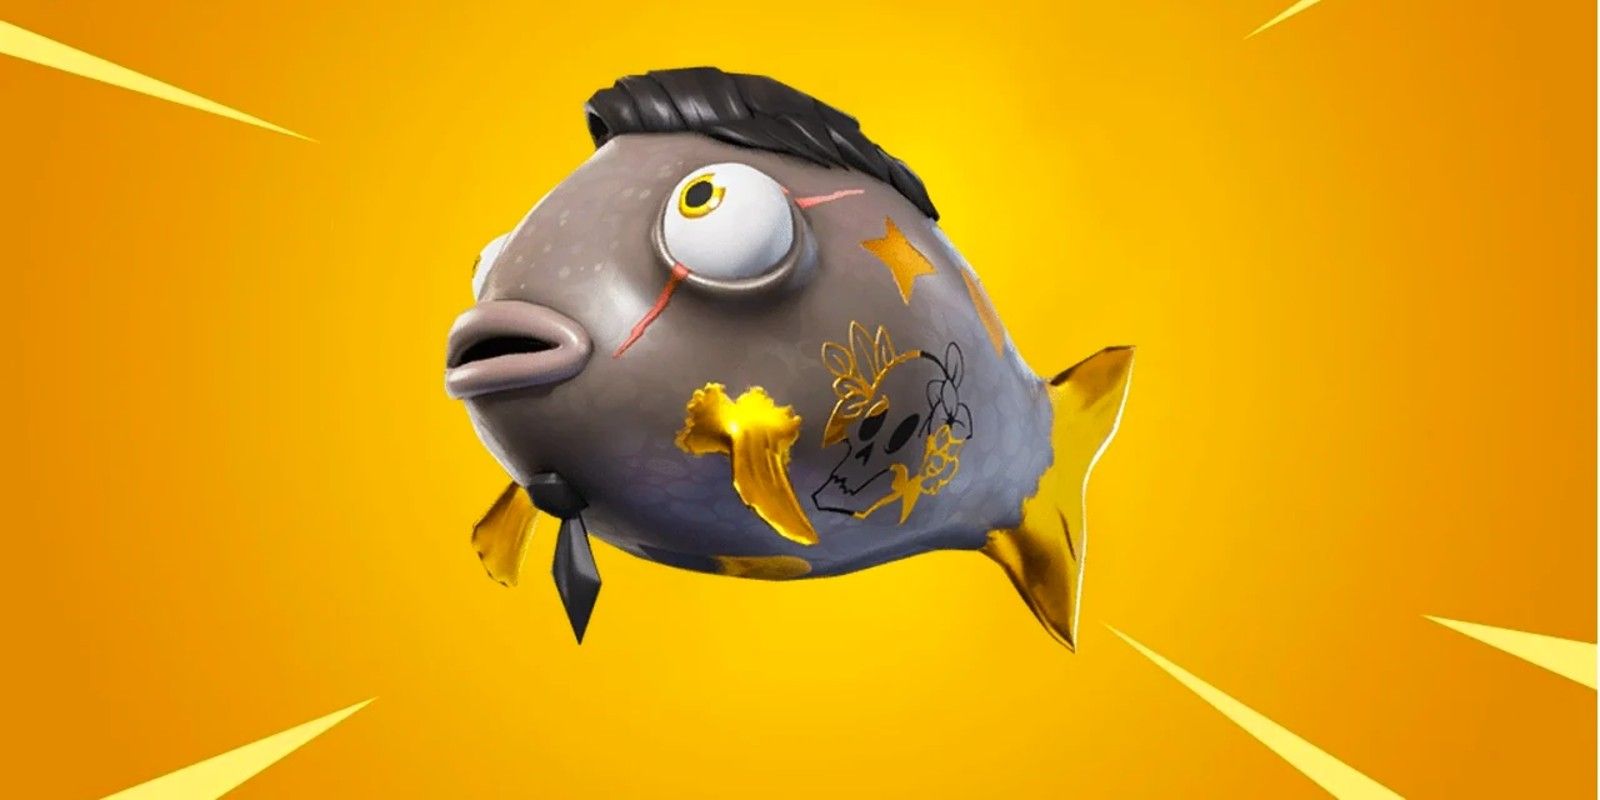 The Midas Flopper Fish is a Legendary fish in Fortnite Season 4